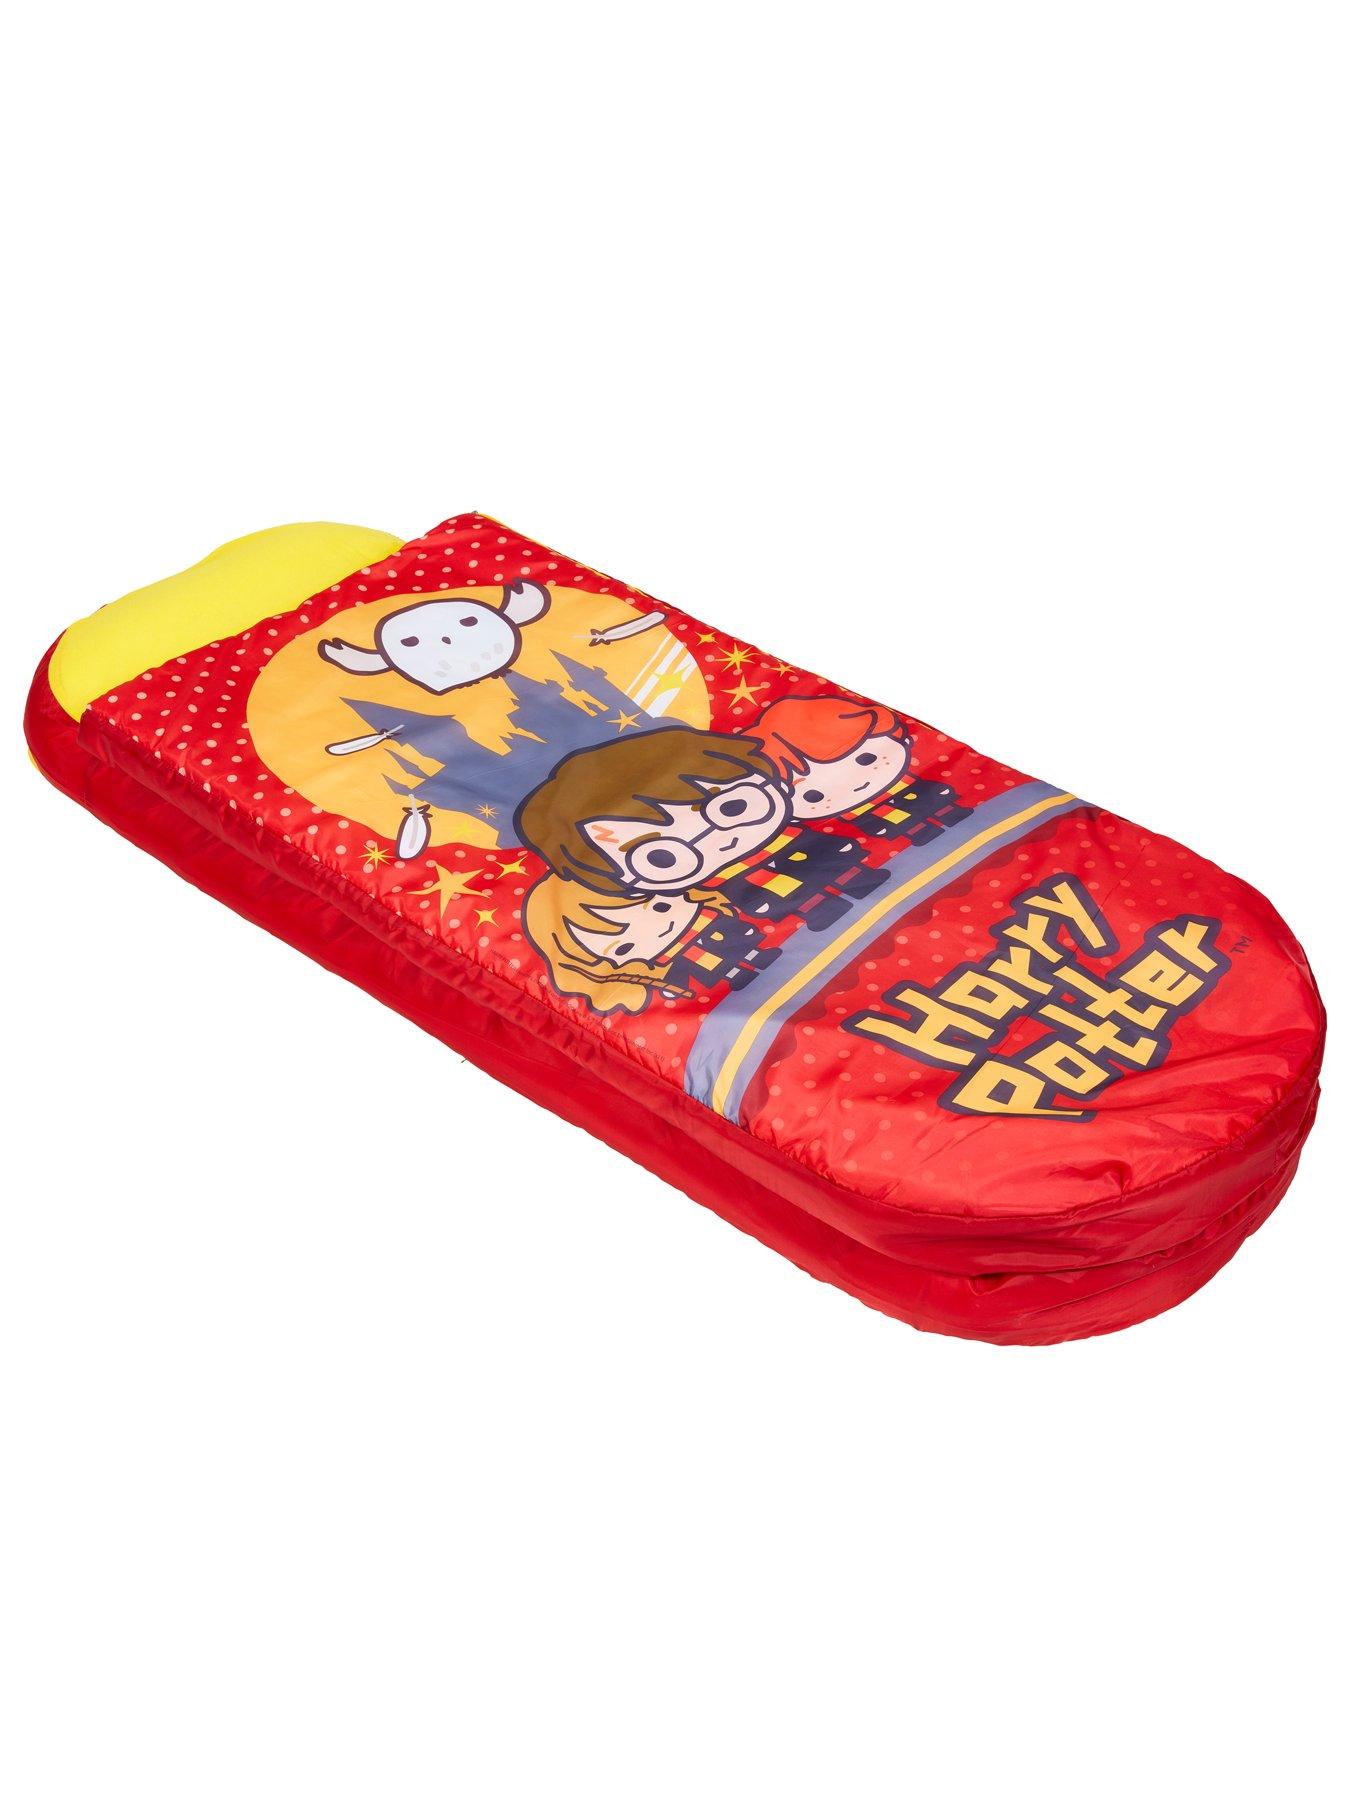 ReadyBed® Deluxe version 1 adulte!